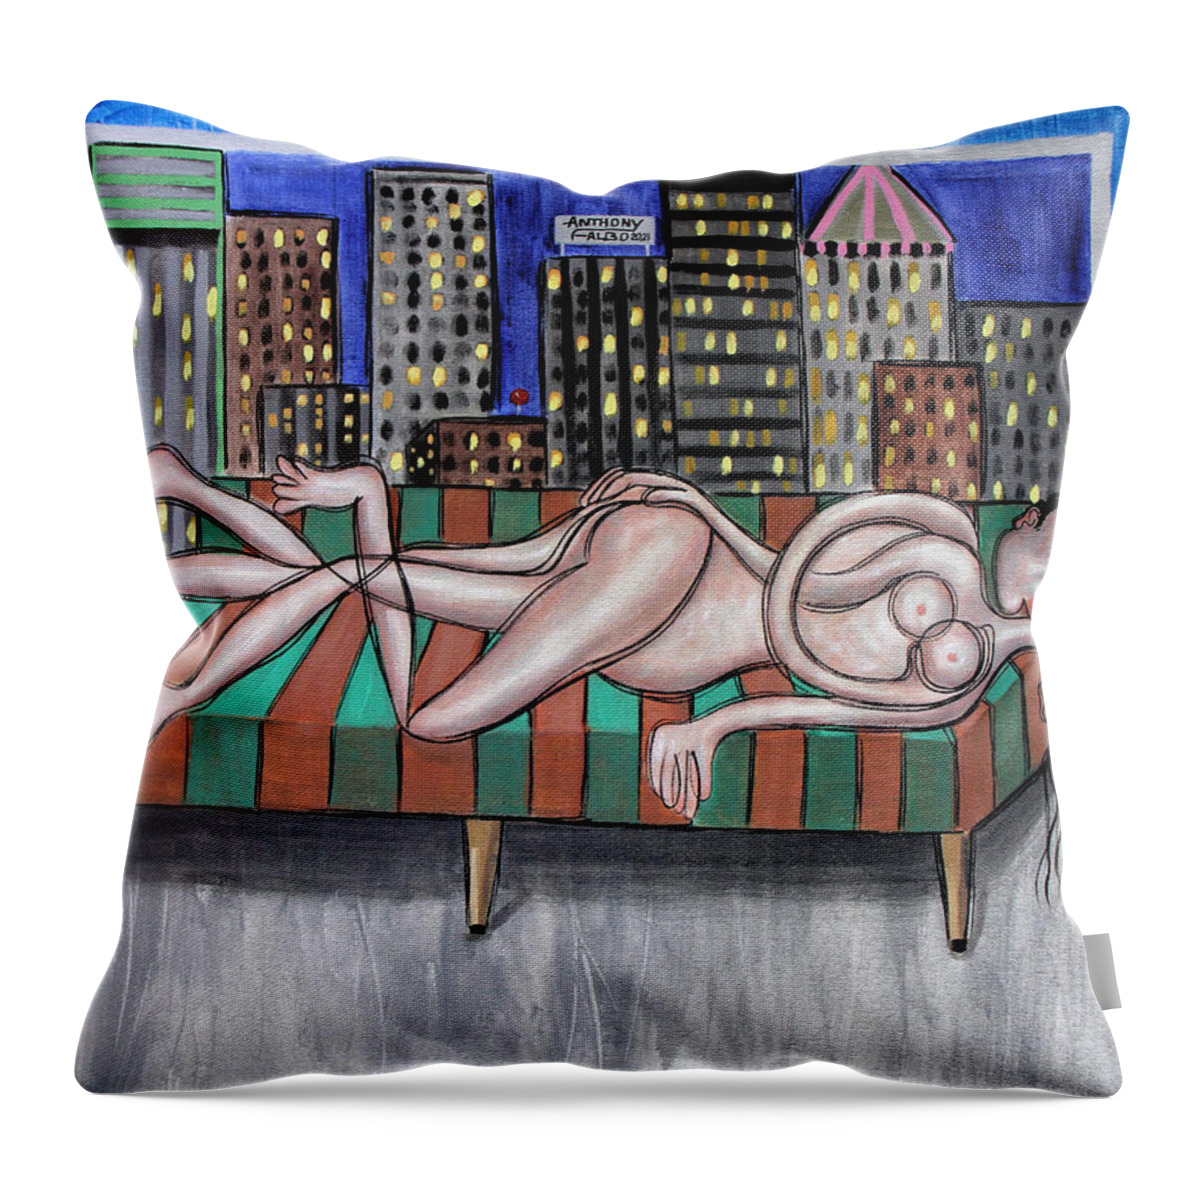 Nude Throw Pillow featuring the painting Cheap Room With A View by Anthony Falbo